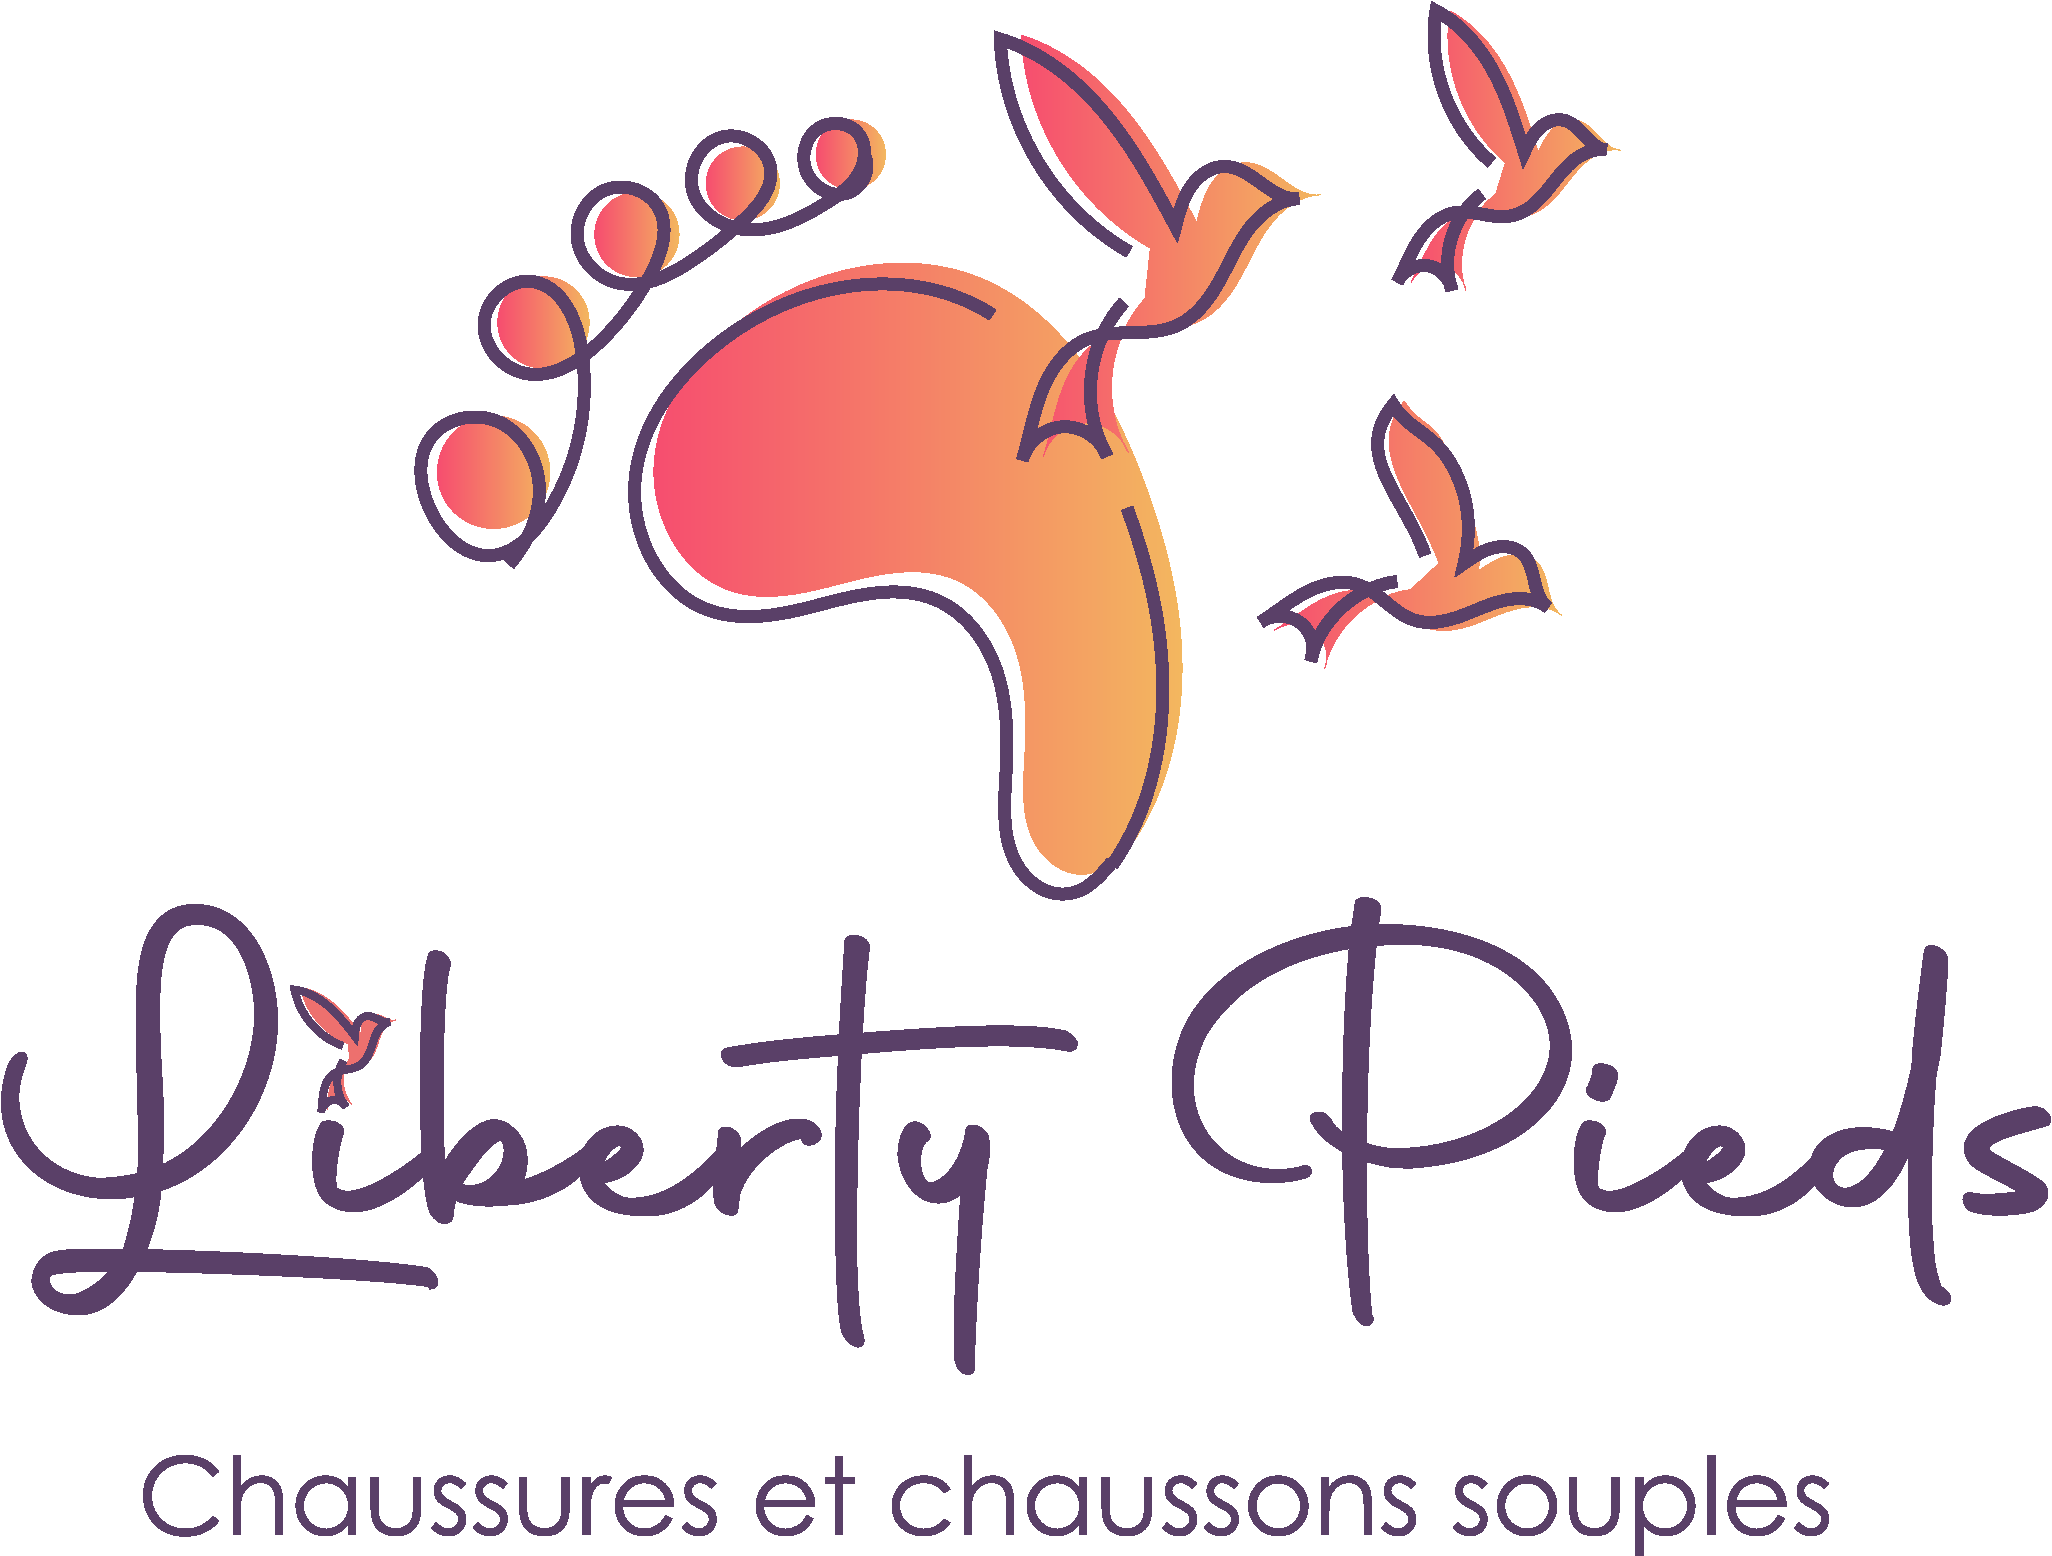 Liberty Pieds : chaussures souples / barefoot